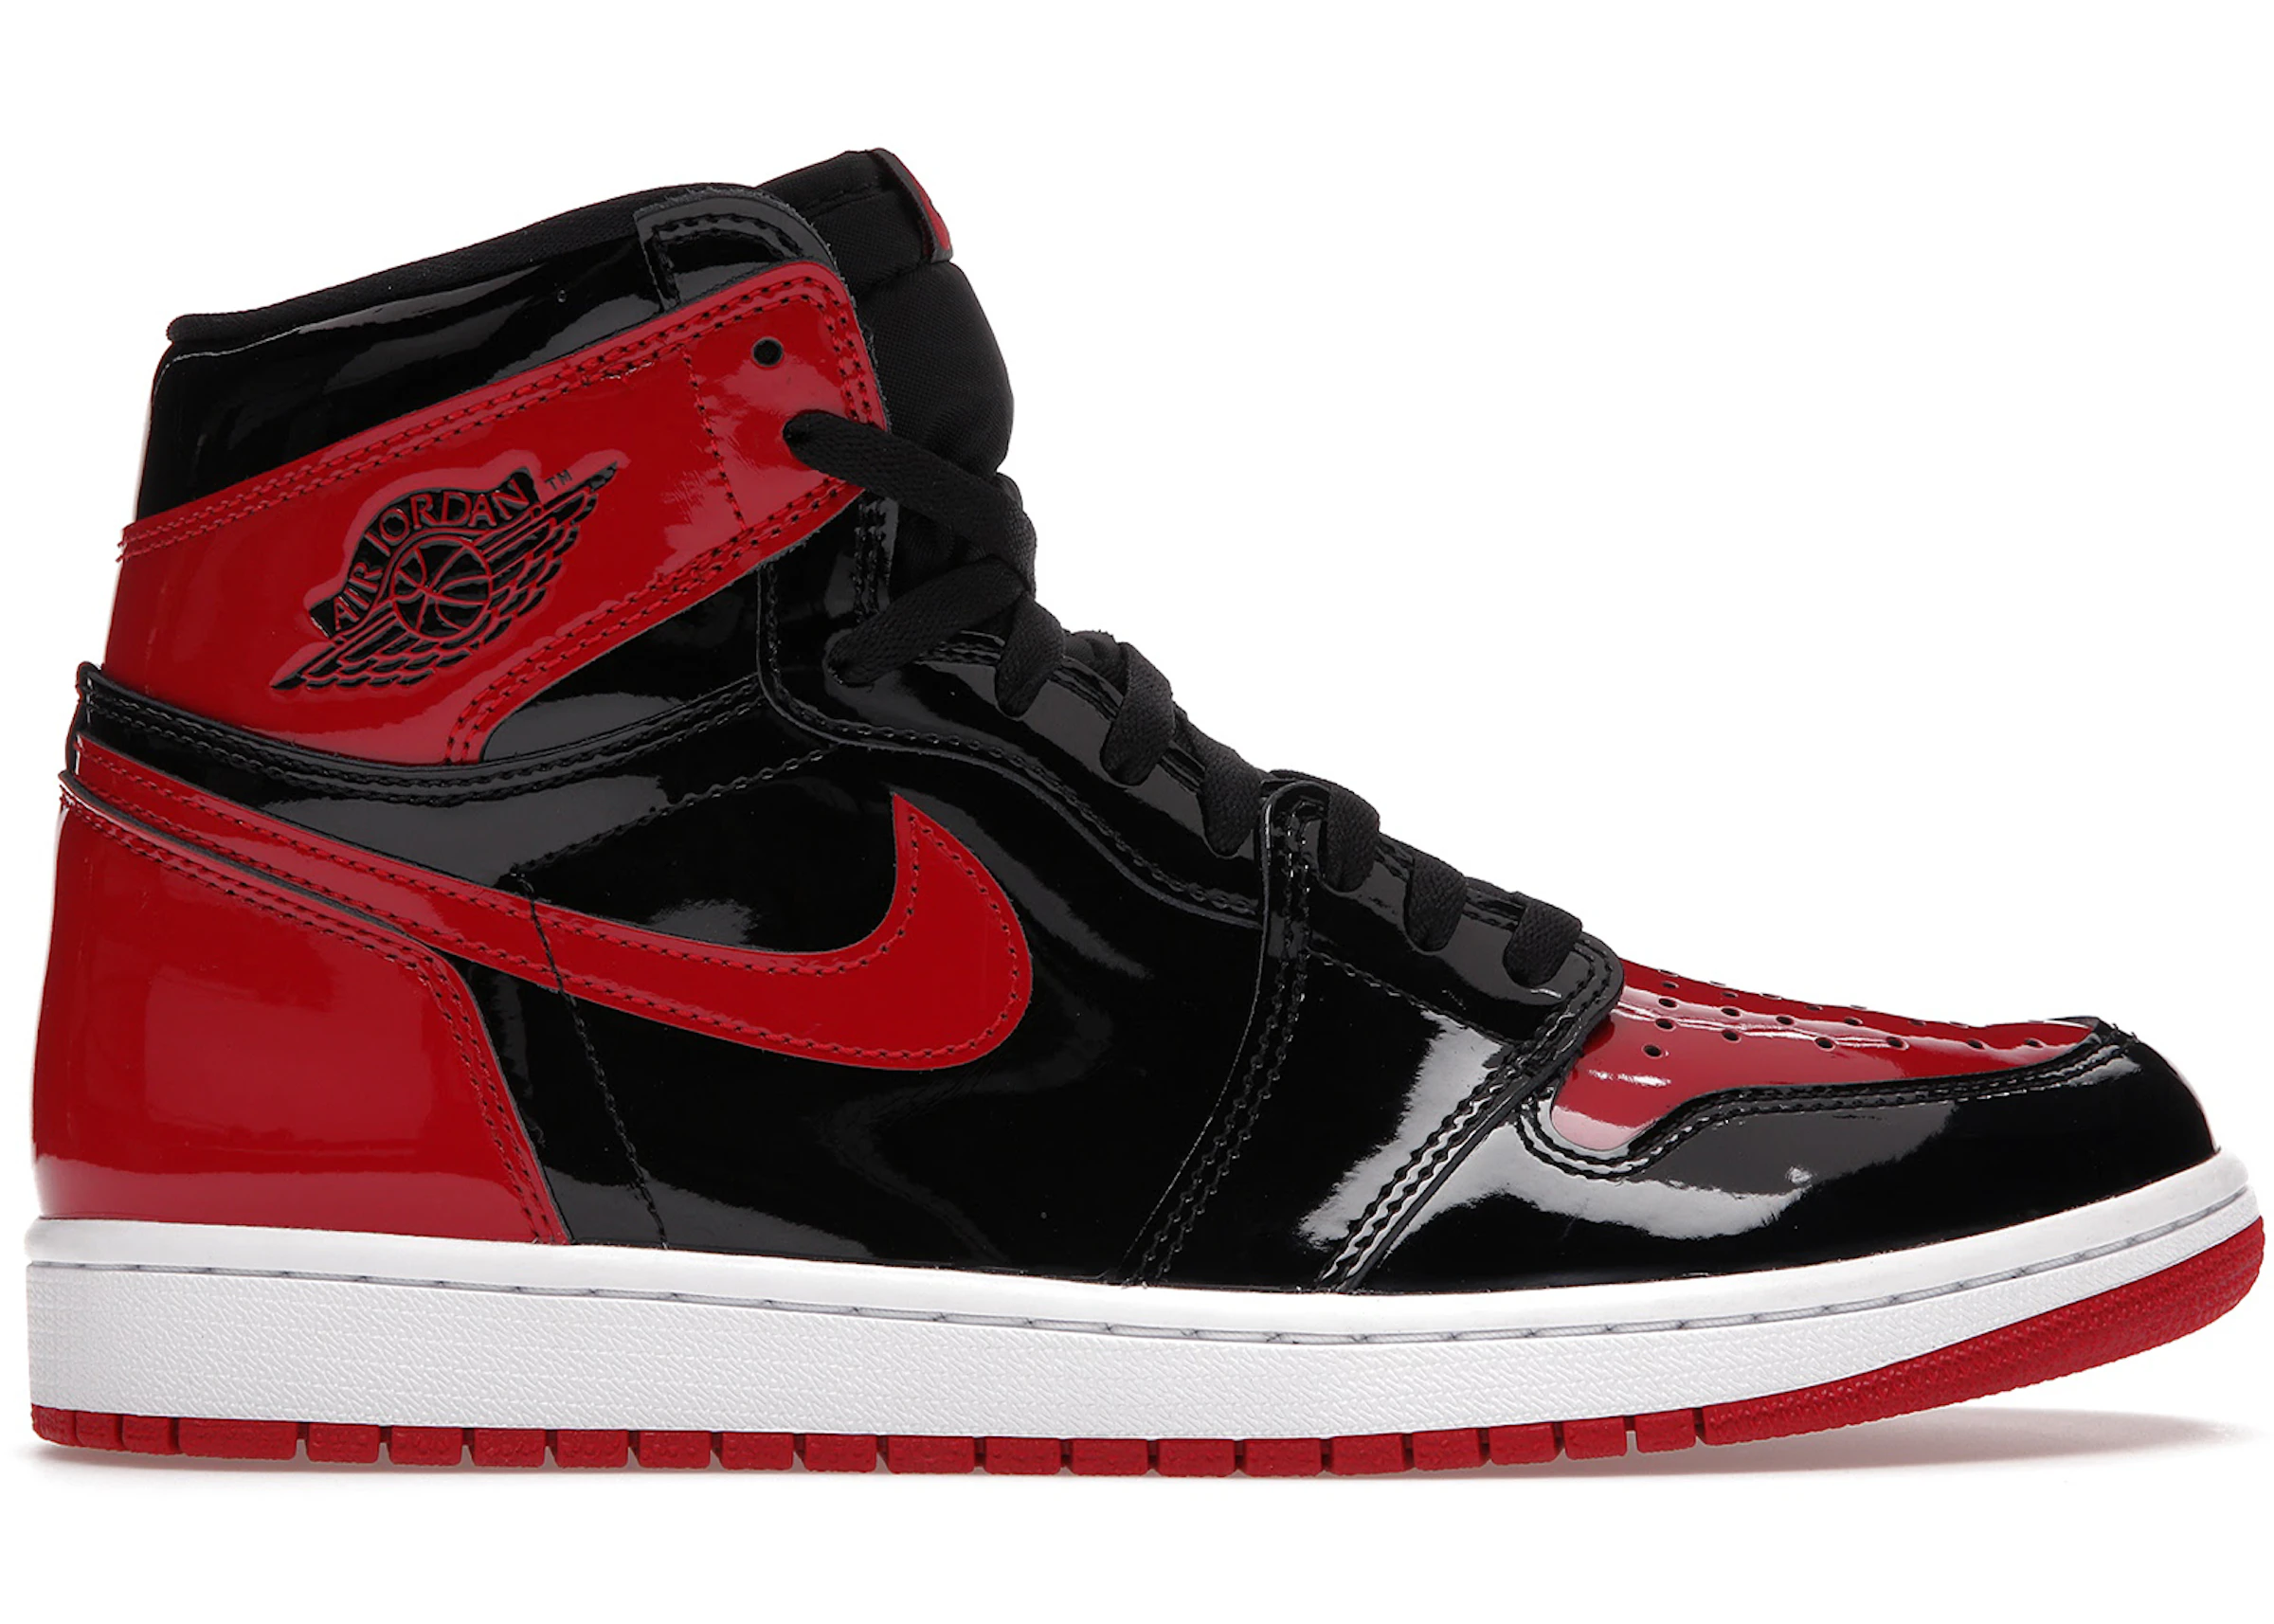 title alignment Disappointed Jordan 1 Retro High OG Patent Bred - 555088-063 - US